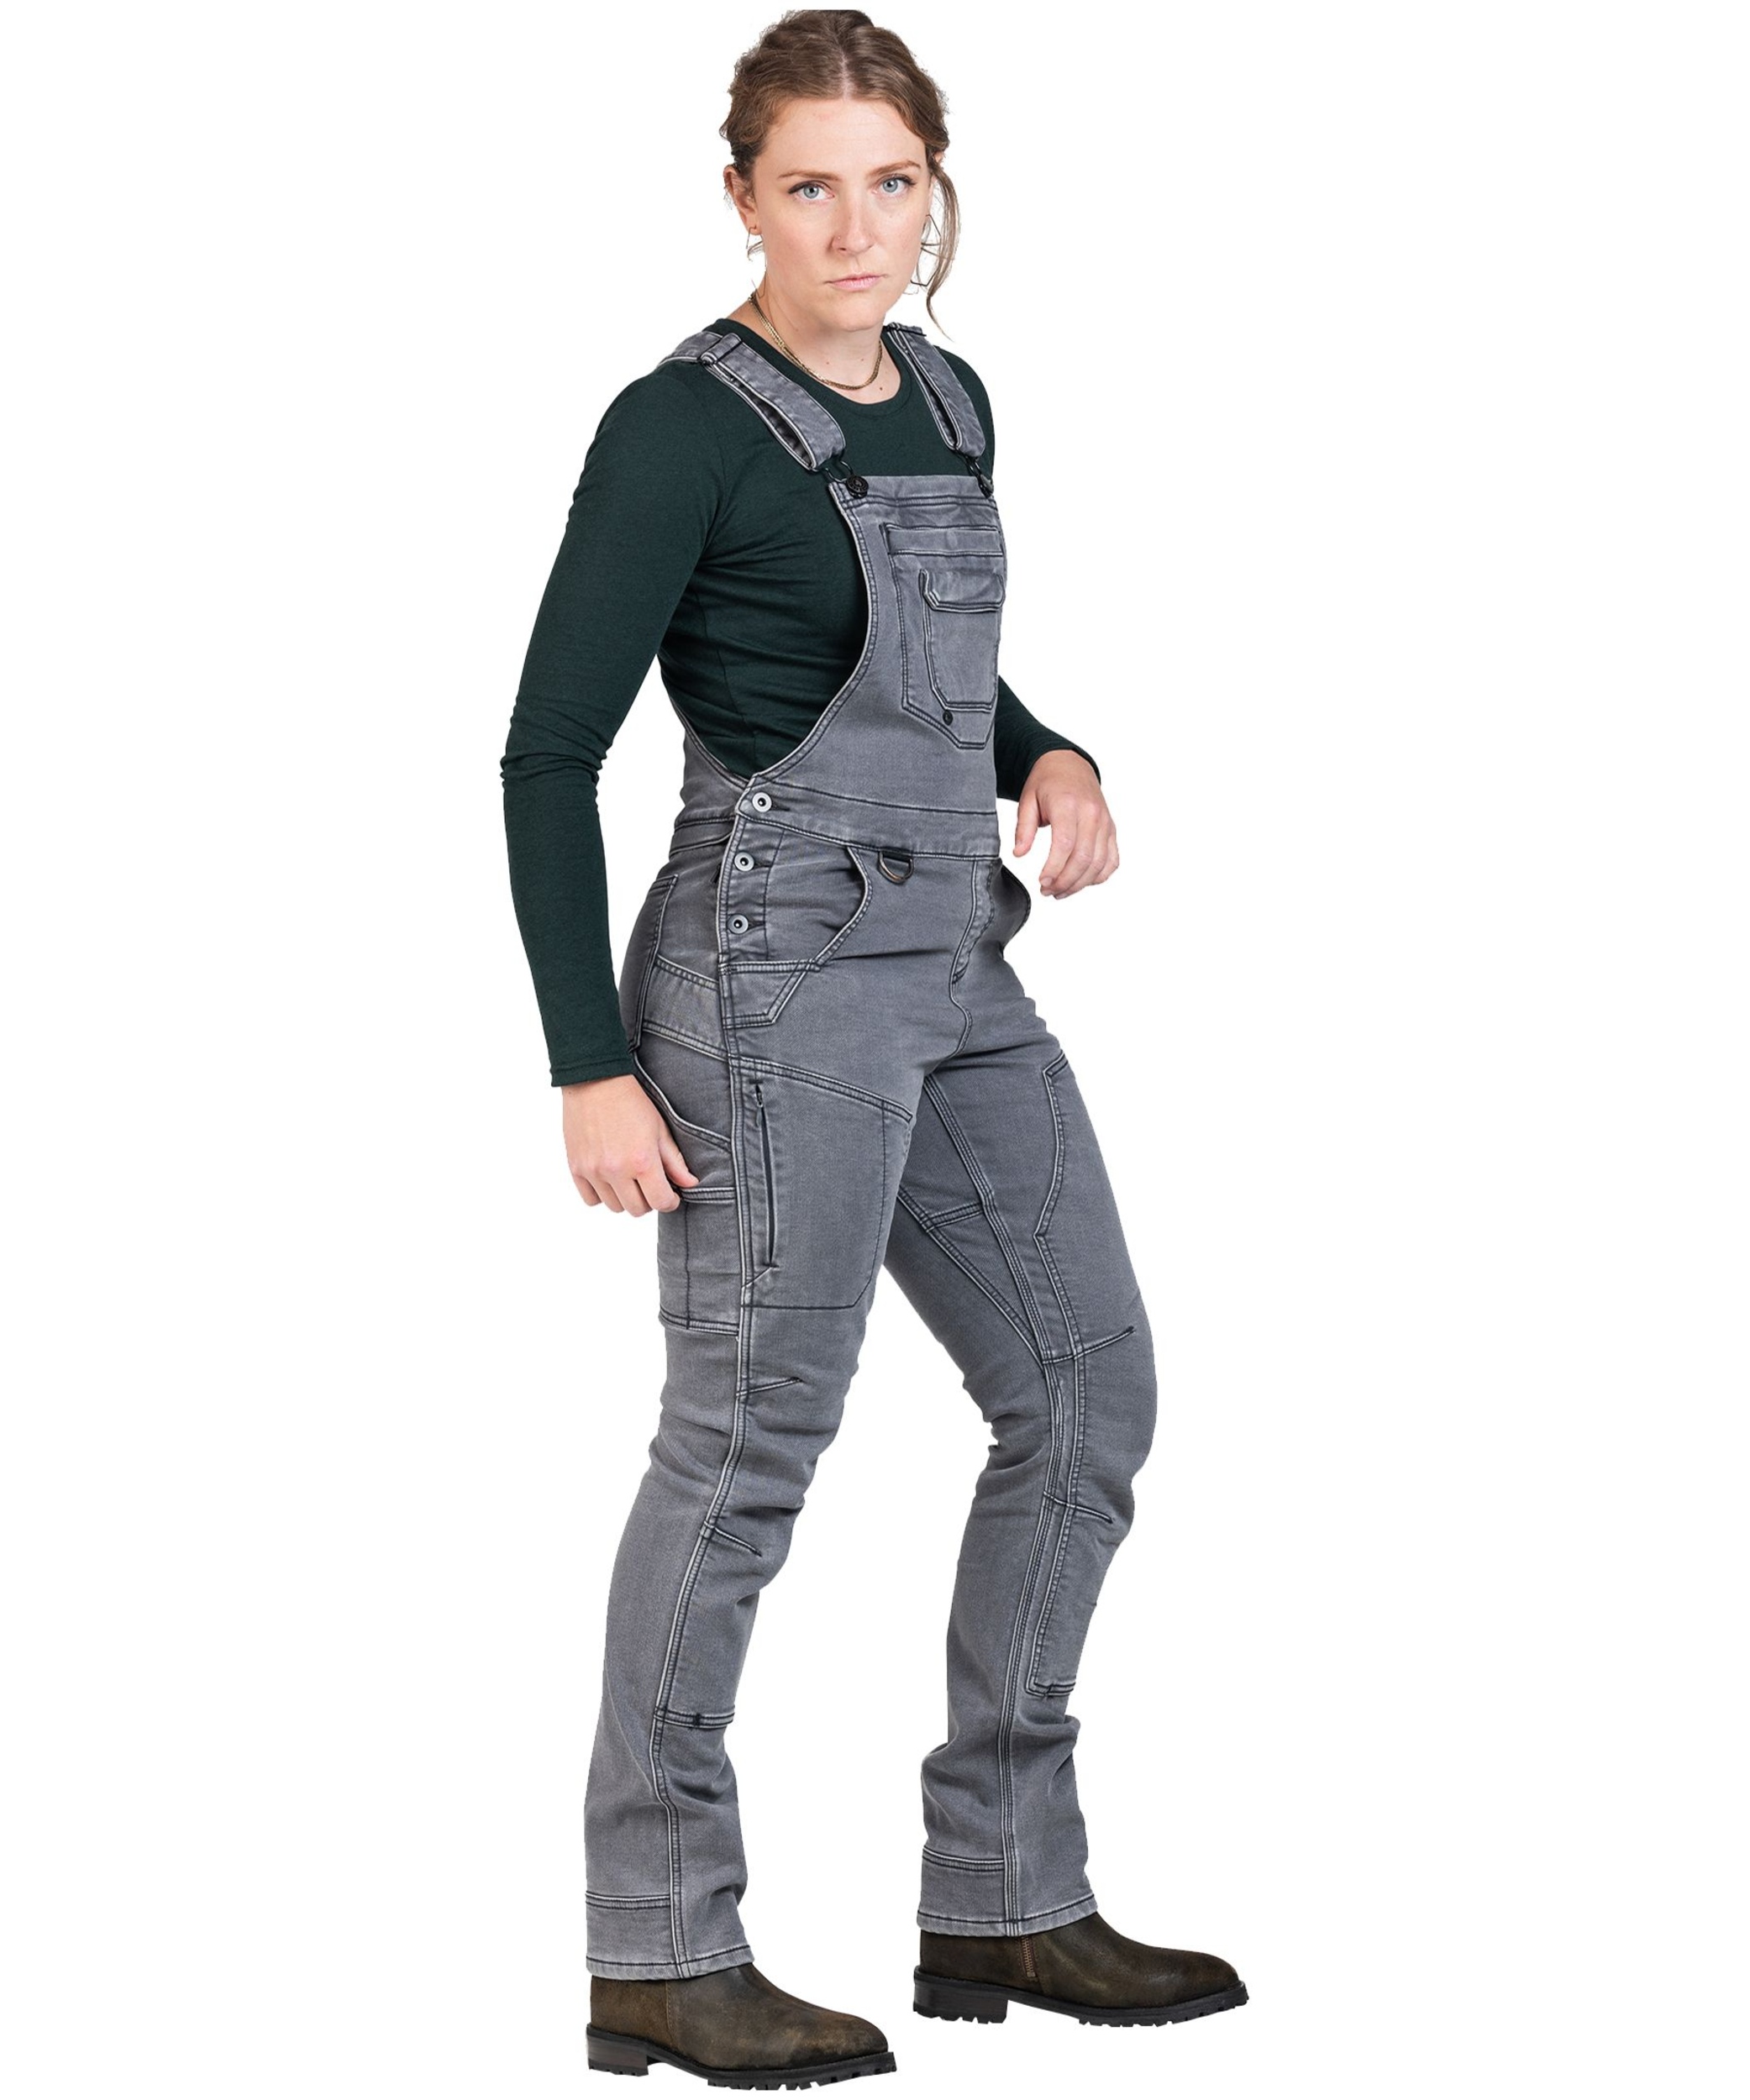 Dovetail Workwear Women's Freshley Dropseat Thermal Insulated Work ...